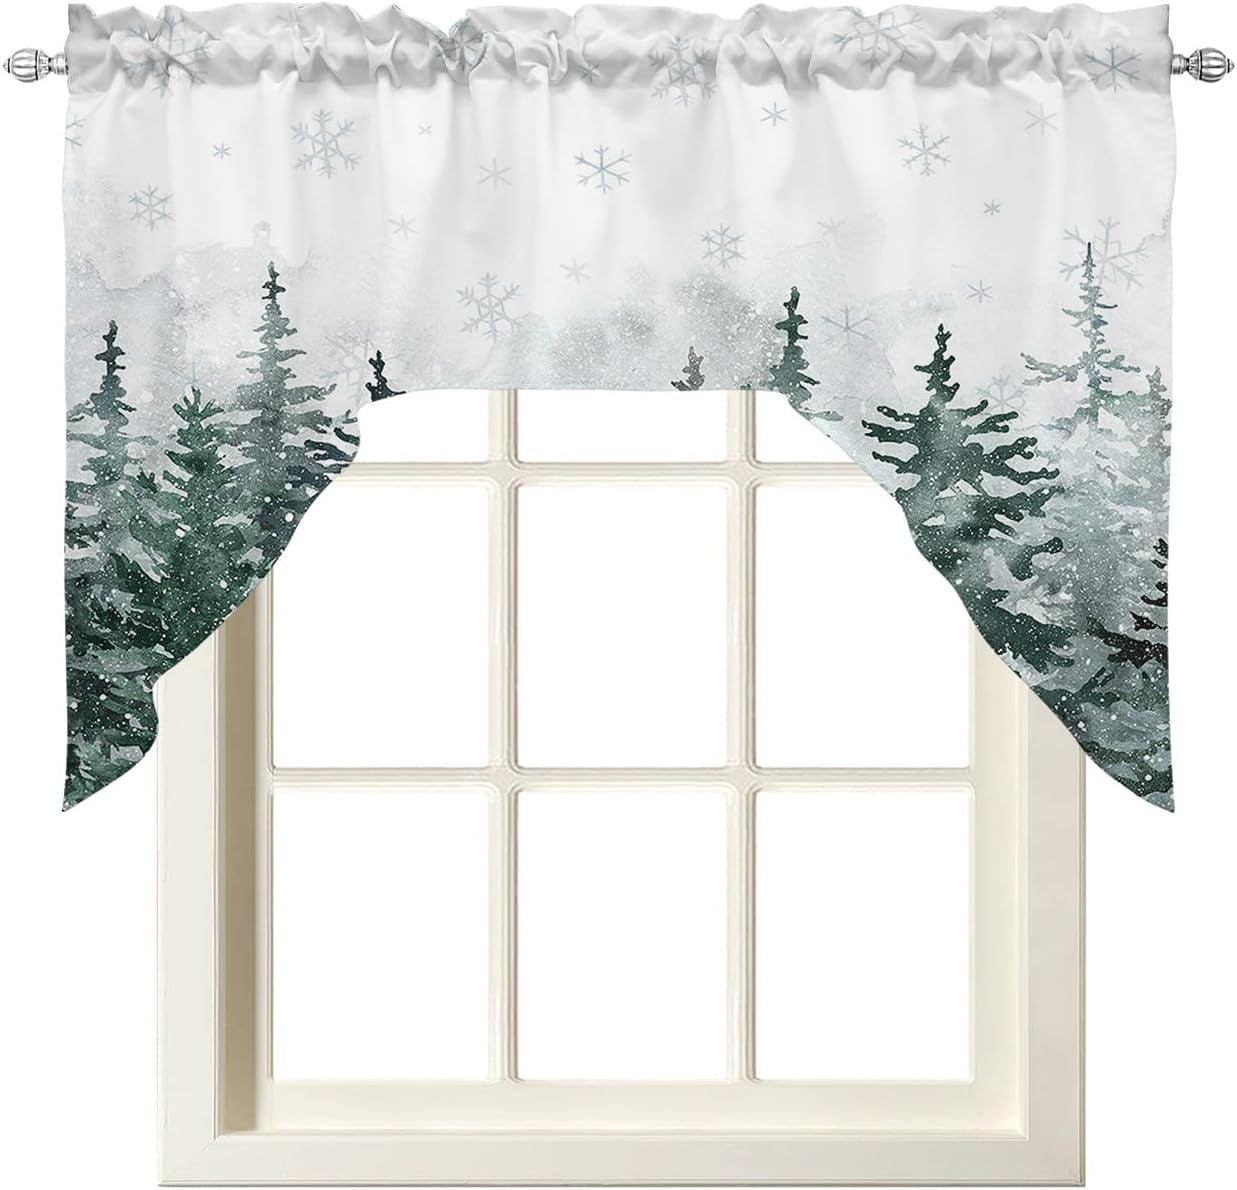 Christmas, Swag Valance Kitchen Curtains, Rod Pocket Valance Curtain Panels for Bedroom Living Room Bathroom Cafe Windows, Forest Winter Pine Tree Snowflake Green 56''X36''